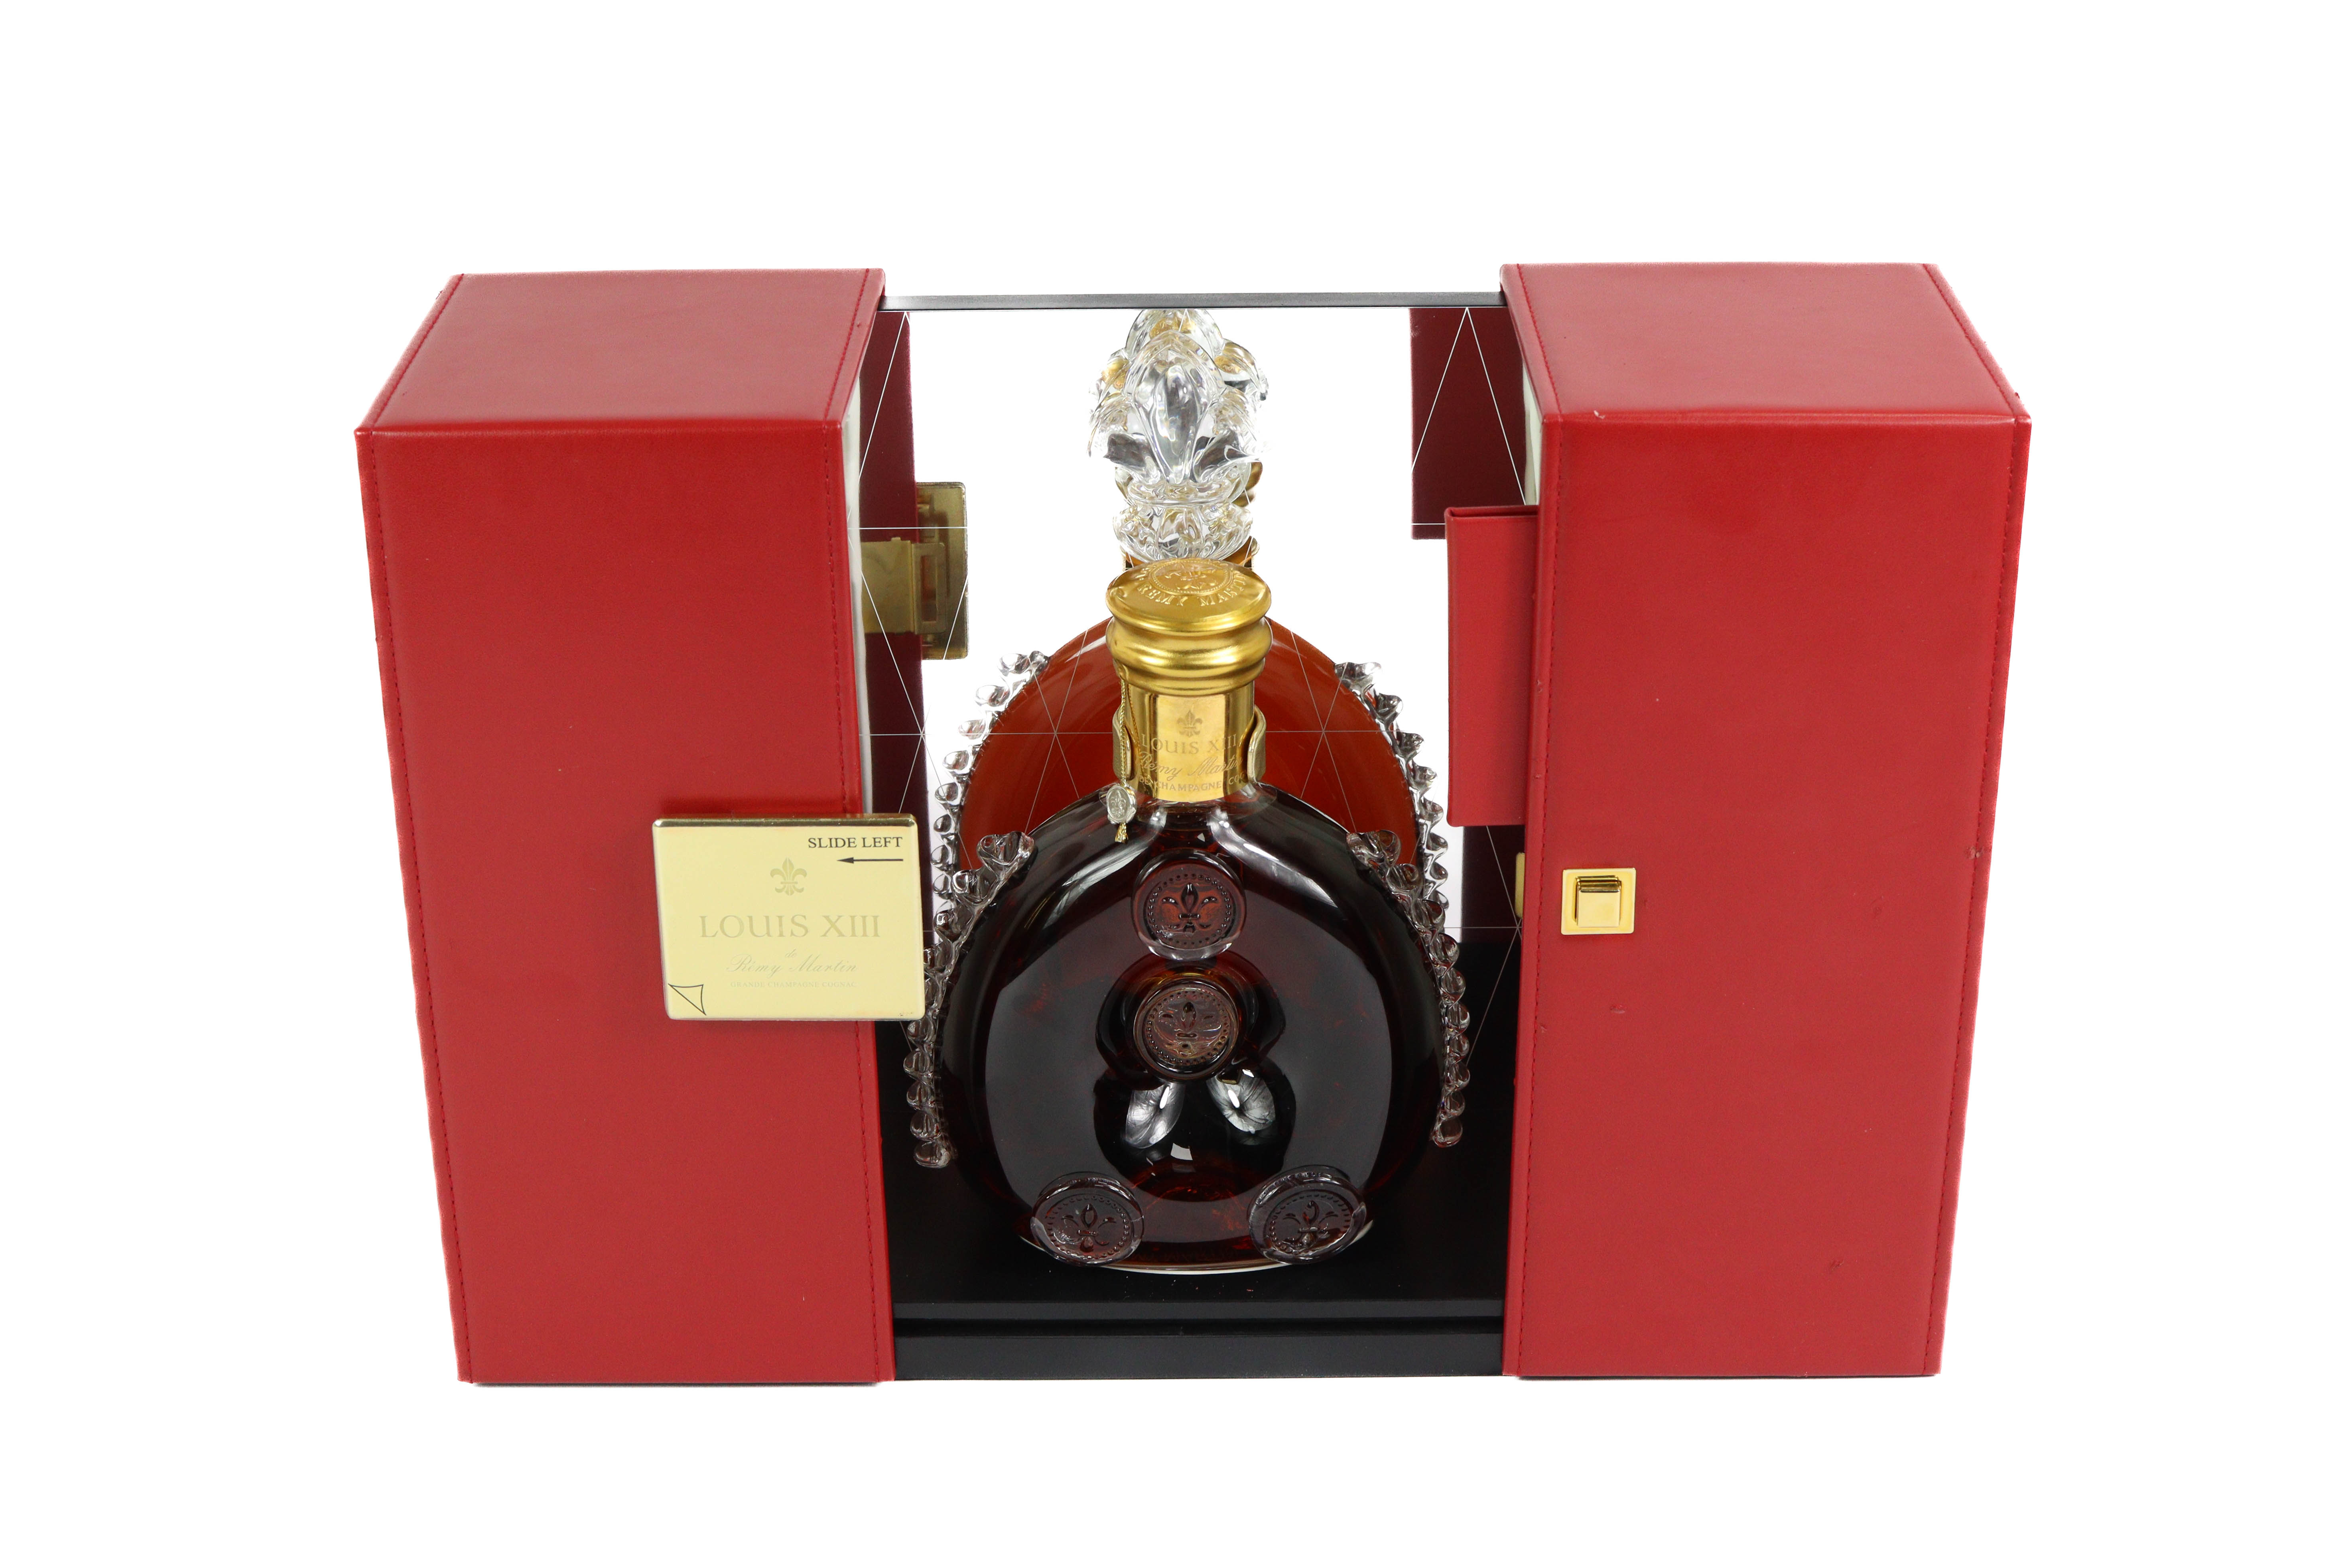 Louis XIII Grand Champagne Cognac - Image 10 of 10